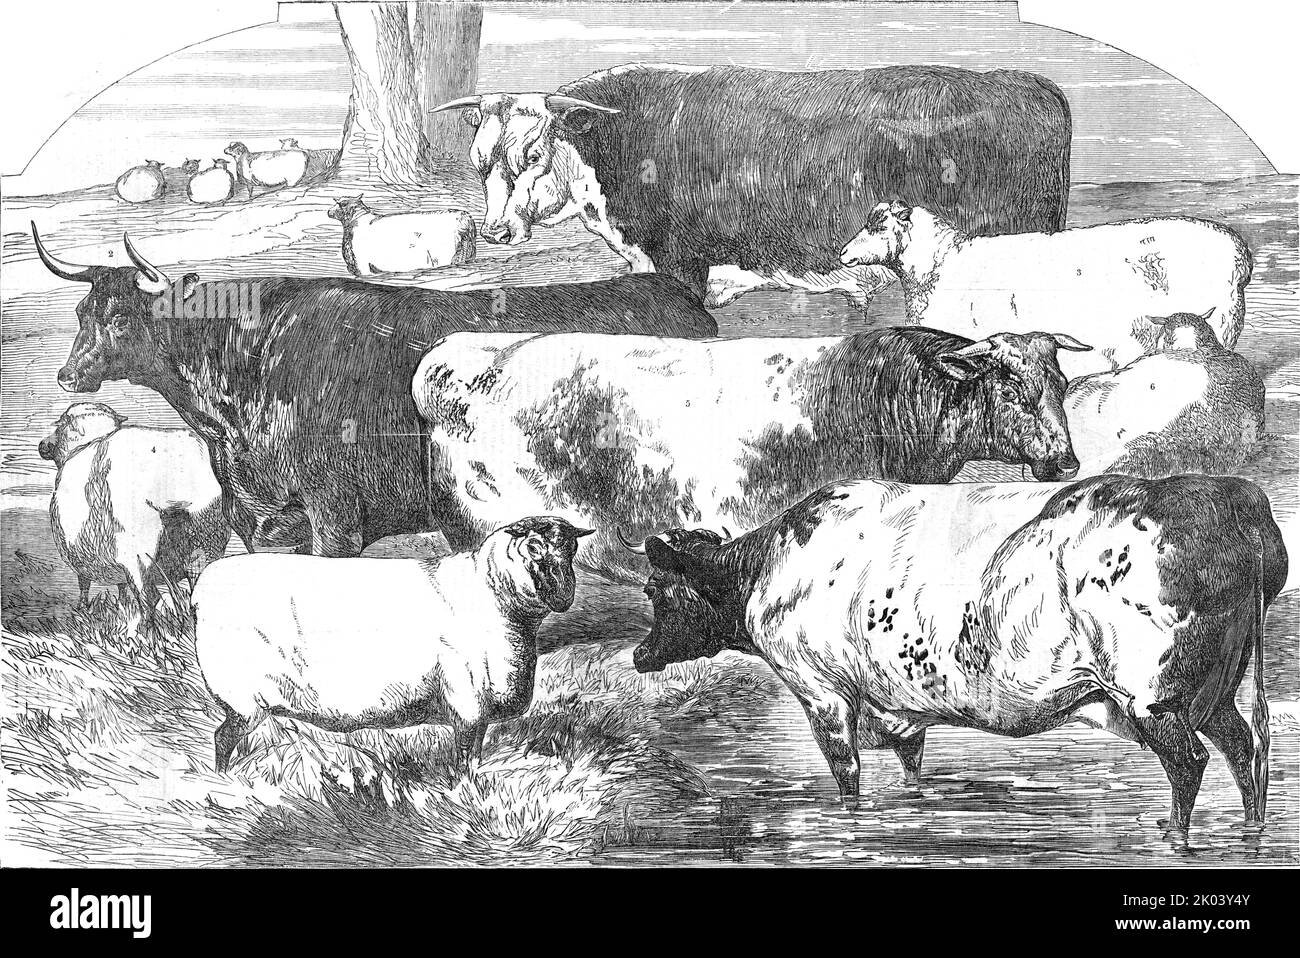 Prize Cattle, from the Exhibition of the Royal Agricultural Society, at Lincoln - drawn by Harrison Weir, 1854. 'Mr. James Rea's Hereford; Mr. Samuel Farthing's Devon; Mr. George Fletcher's Cotswold; Duke of Richmond's Southdown; Mr. W. Sanday's Short-Horn; Mr. George Hewer's; Mr. Henry Lugar's Southdown; Mr. Charles Townley's Short-Horn'. From &quot;Illustrated London News&quot;, 1854. Stock Photo